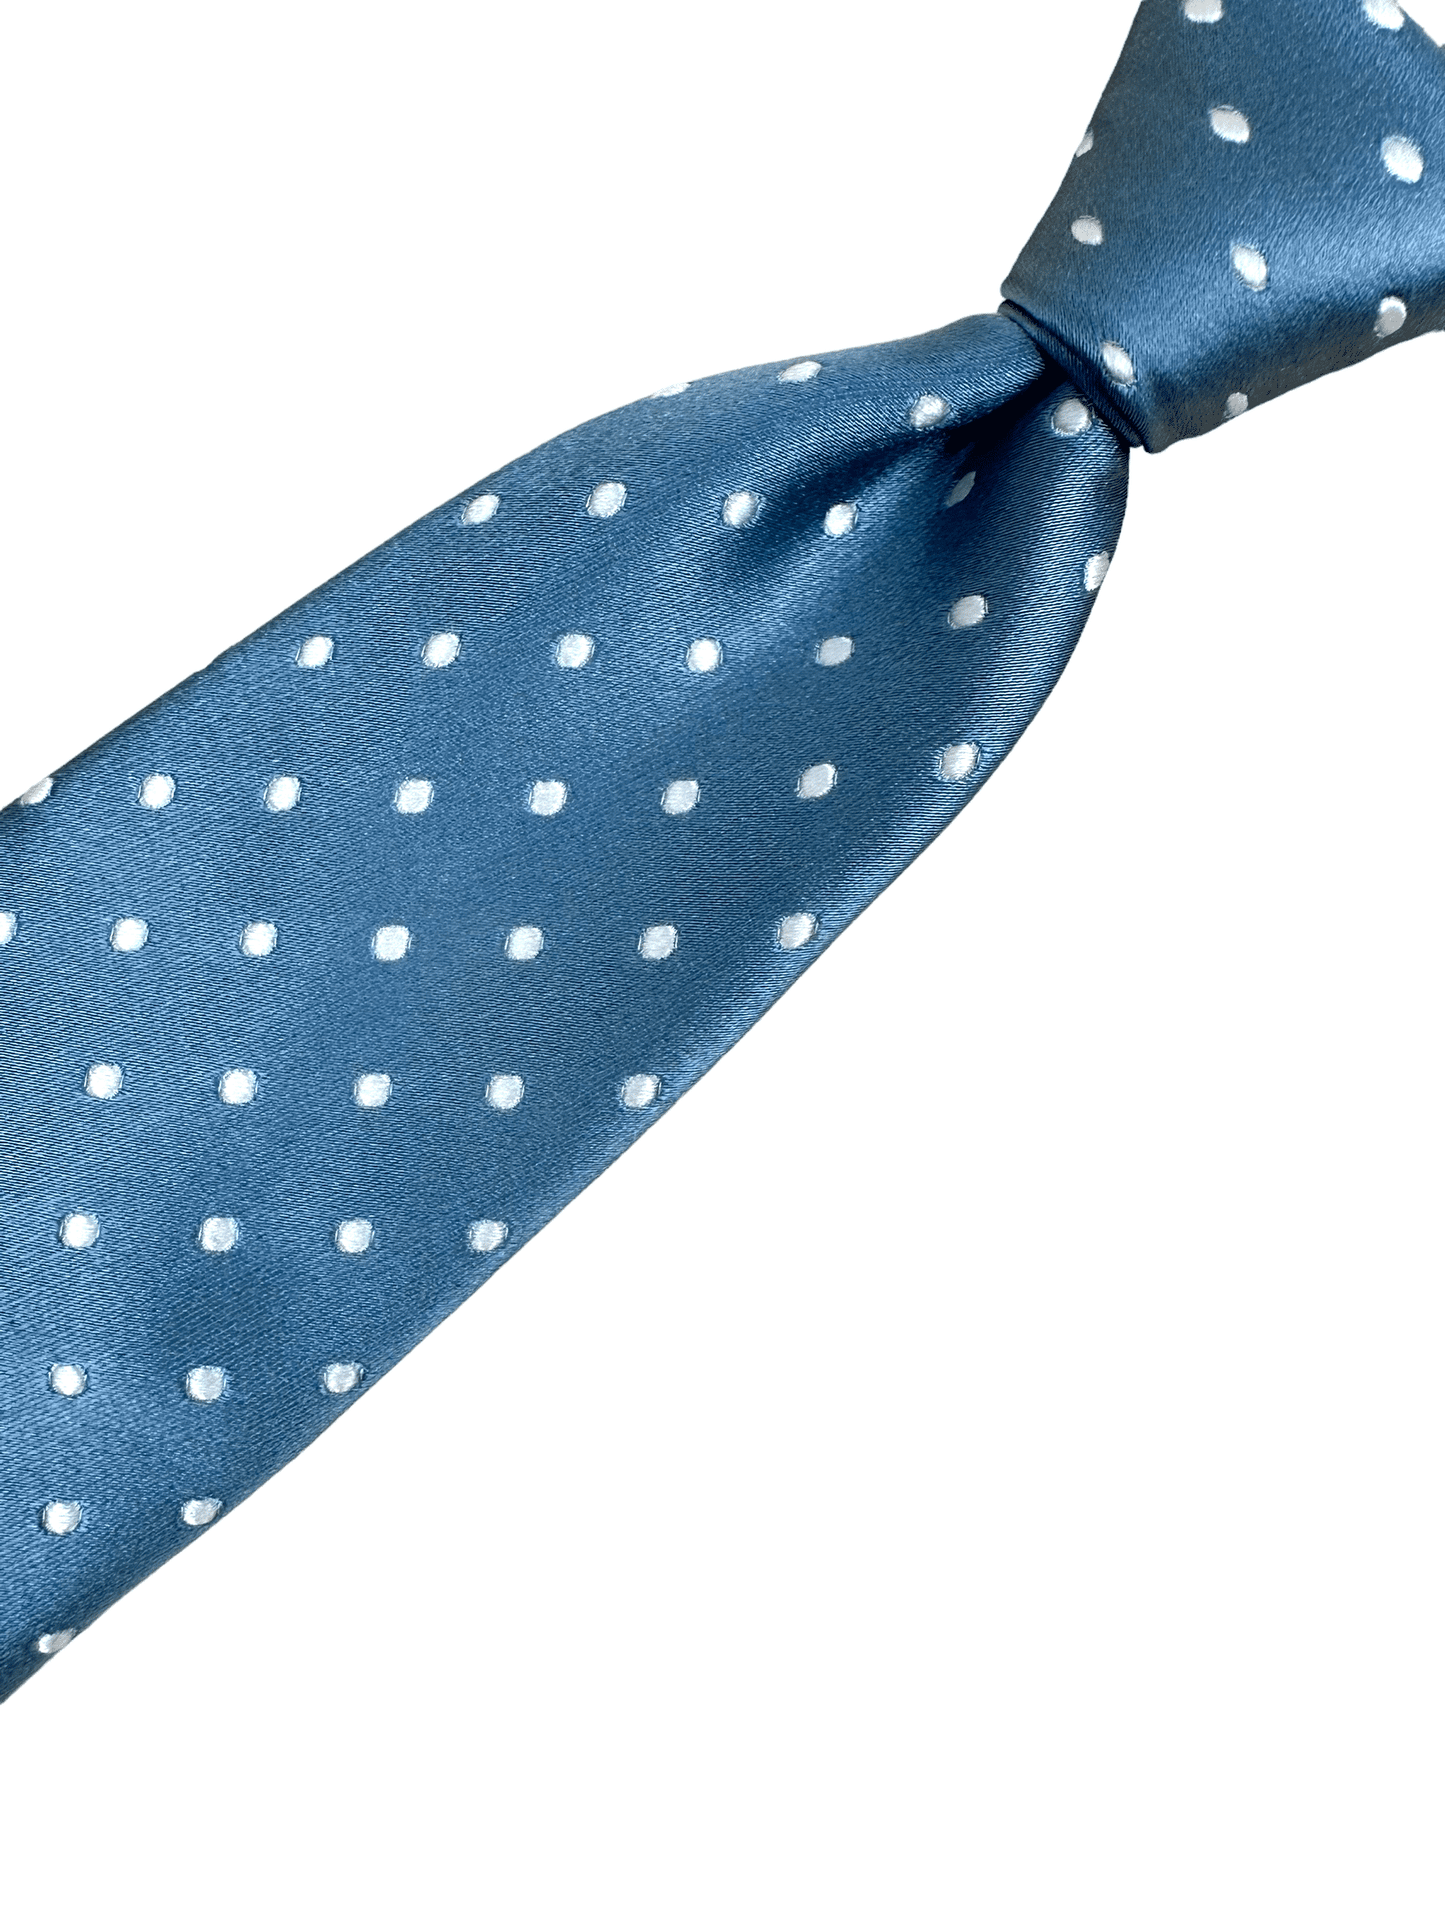 Tom Ford Light Blue Polka Dot Silk Tie - Genuine Design luxury consignment Calgary, Alberta, Canada New & pre-owned clothing, shoes, accessories.